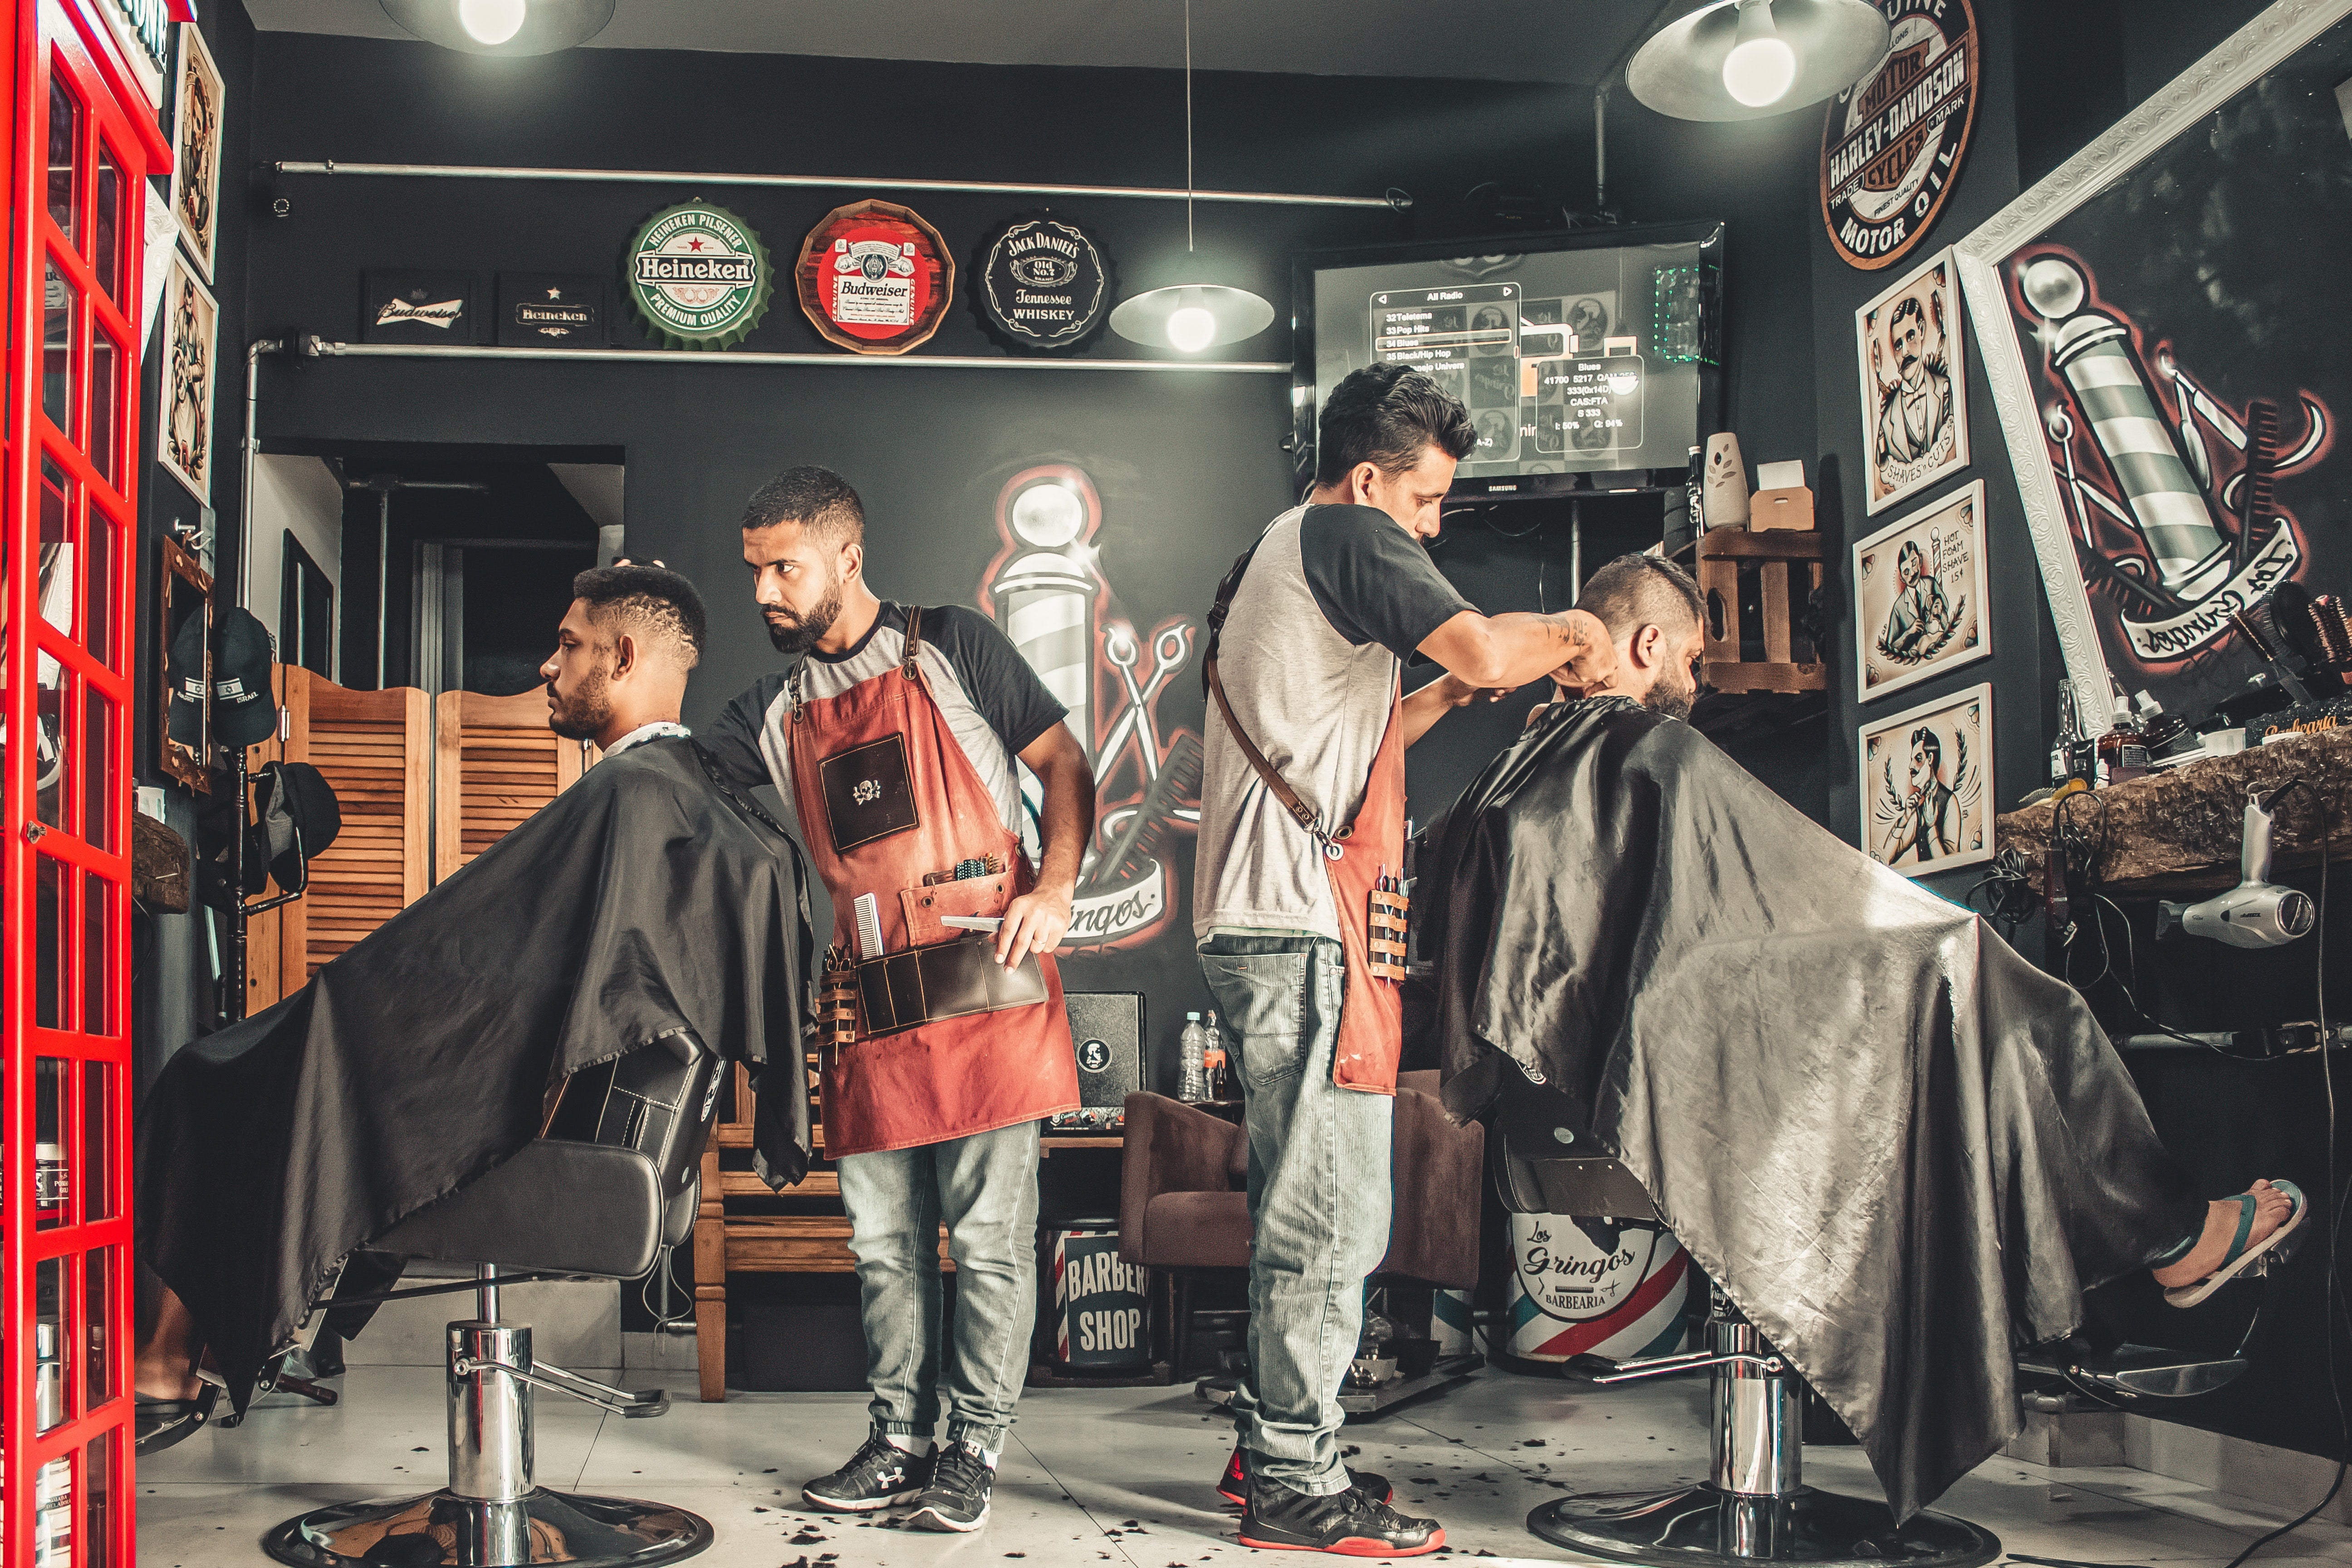 How To Talk To Your Barber After The Holiday Rush